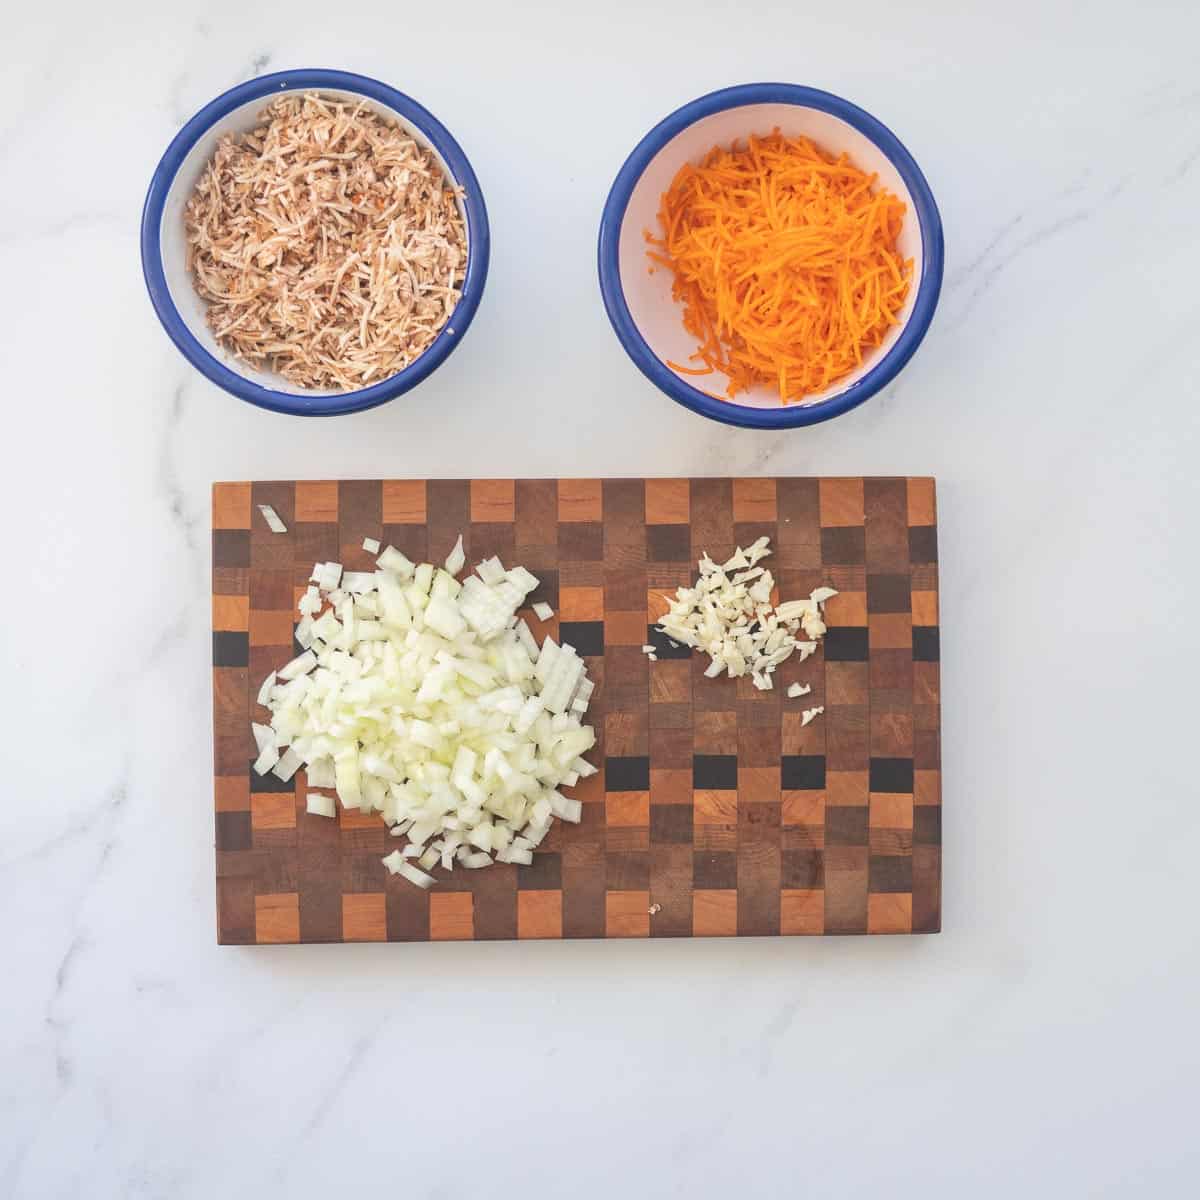 Bowl of grated vegetables and a chopping board with diced onion and crushed garlic cloves.